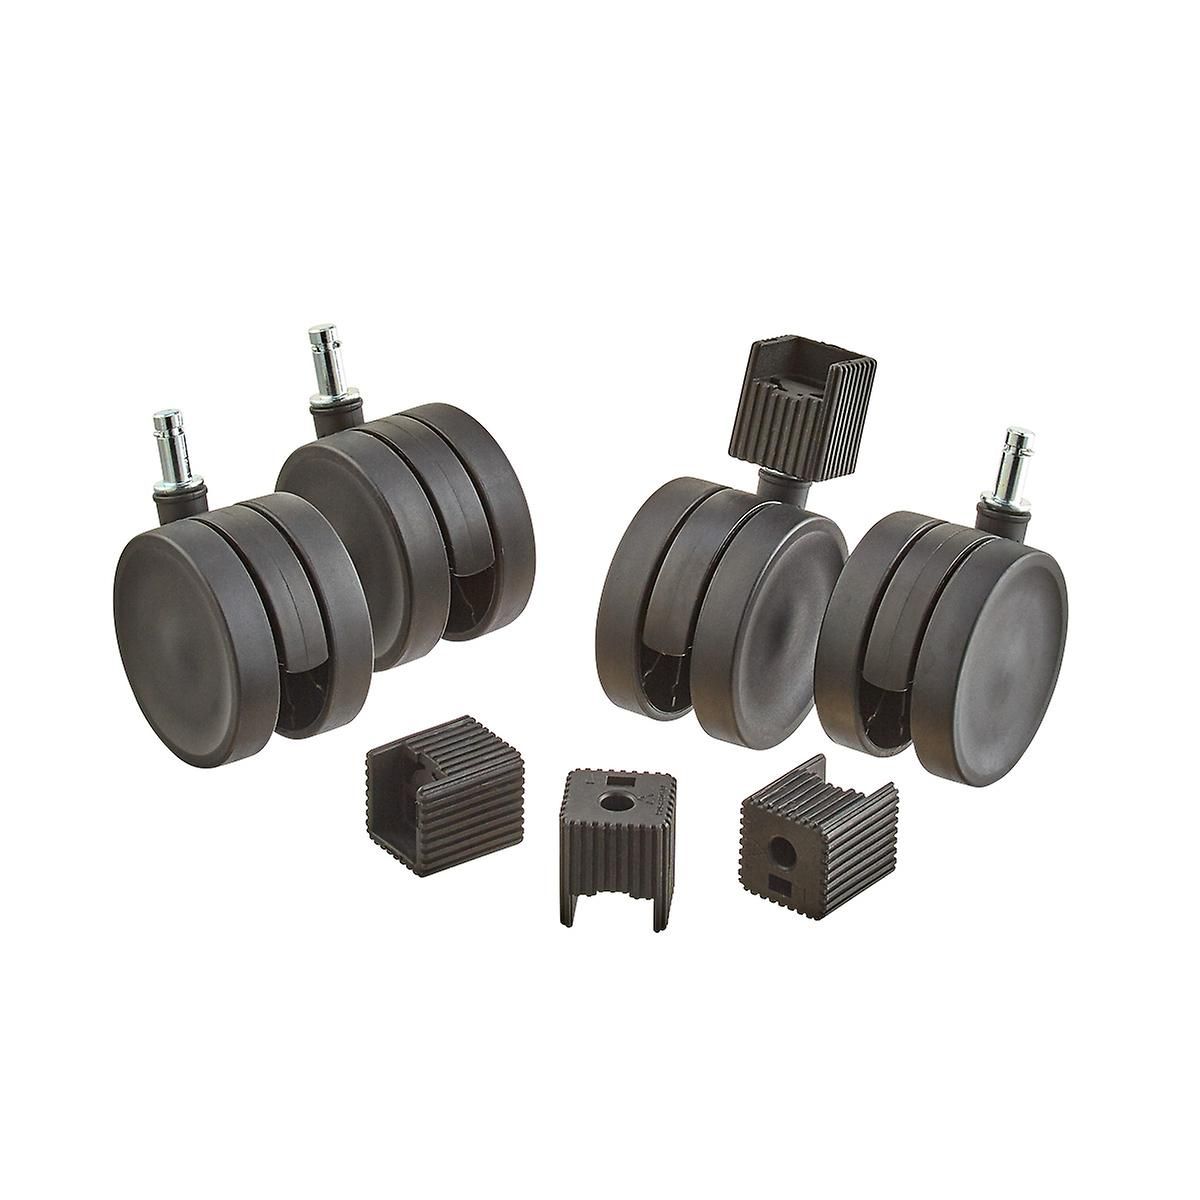 Elfa Casters Set of 4 | The Container Store